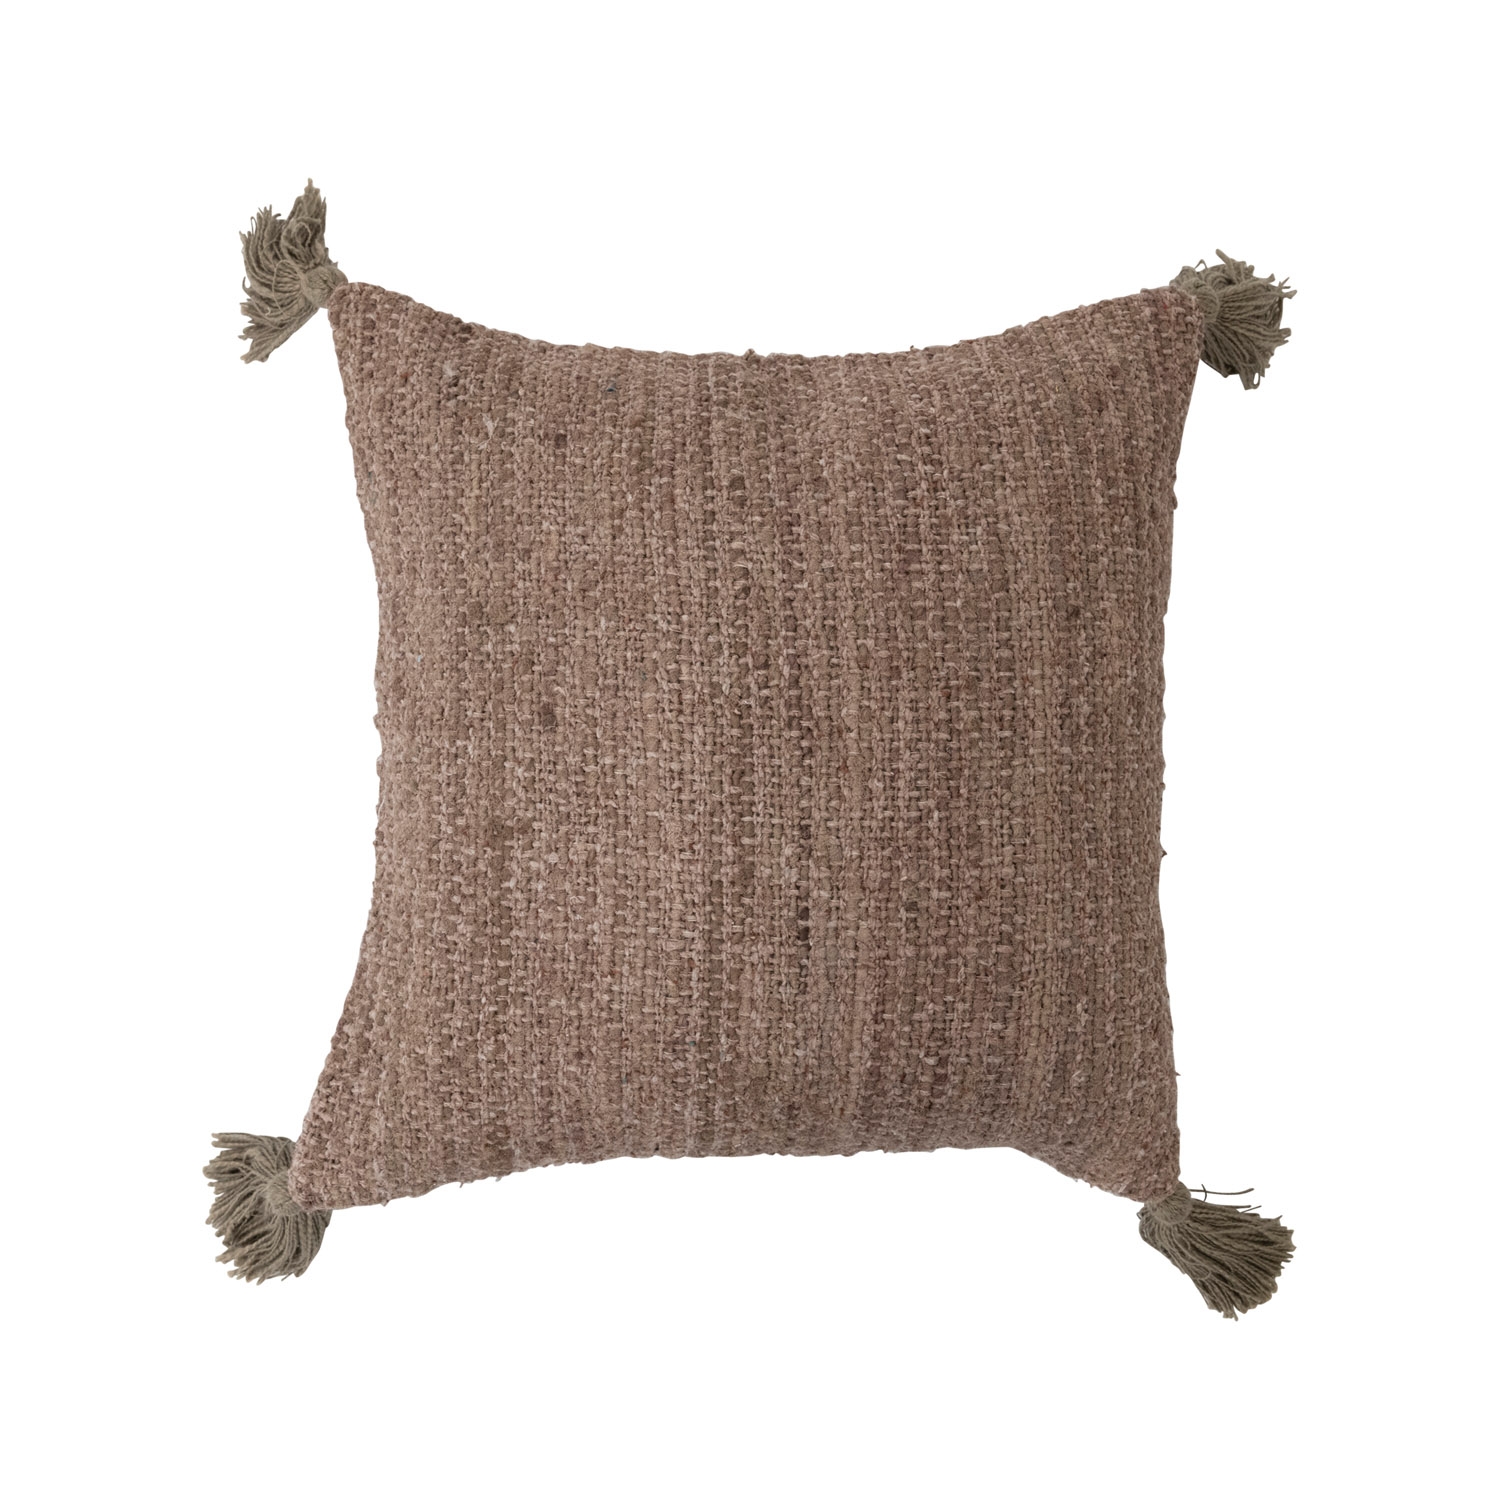 Woven Cotton Striped Pillow with Chambray Back and Tassels - Image 0